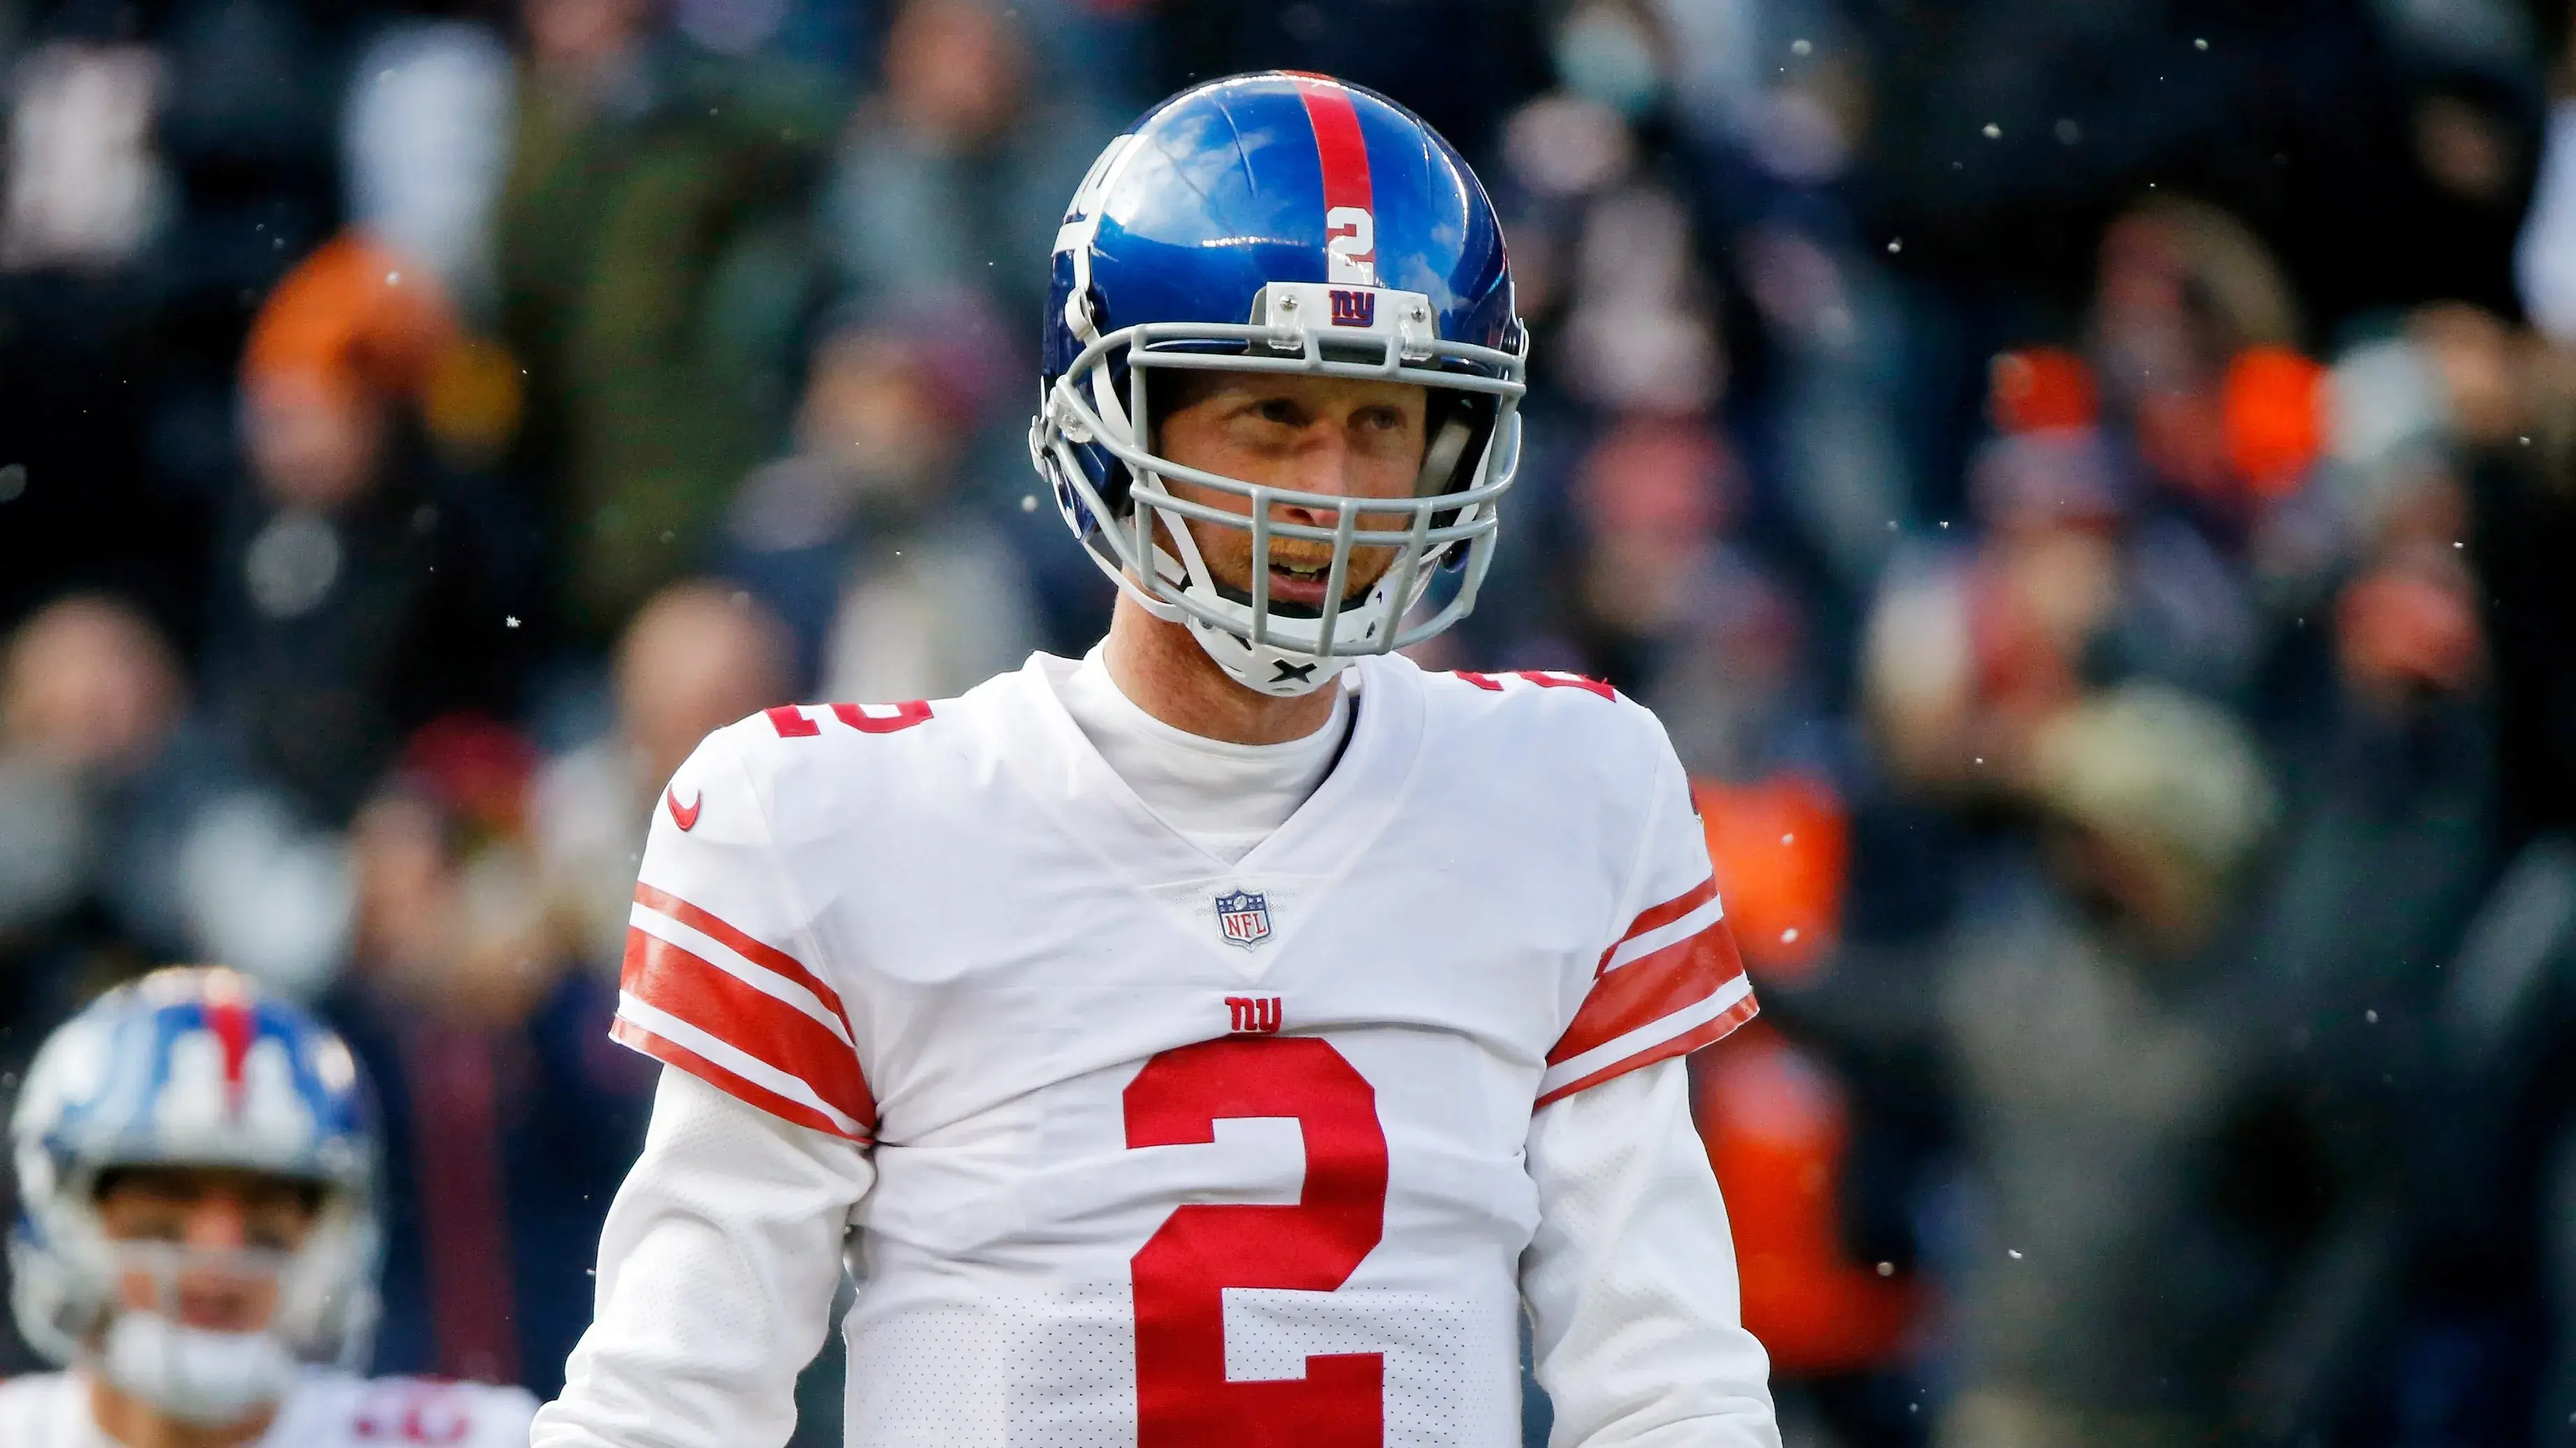 Jan 2, 2022; Chicago, Illinois, USA; New York Giants quarterback Mike Glennon (2) reacts after turning over the ball against the Chicago Bears on a fumble during the first half at Soldier Field. Mandatory Credit: Jon Durr-USA TODAY Sports / Jon Durr-USA TODAY Sports